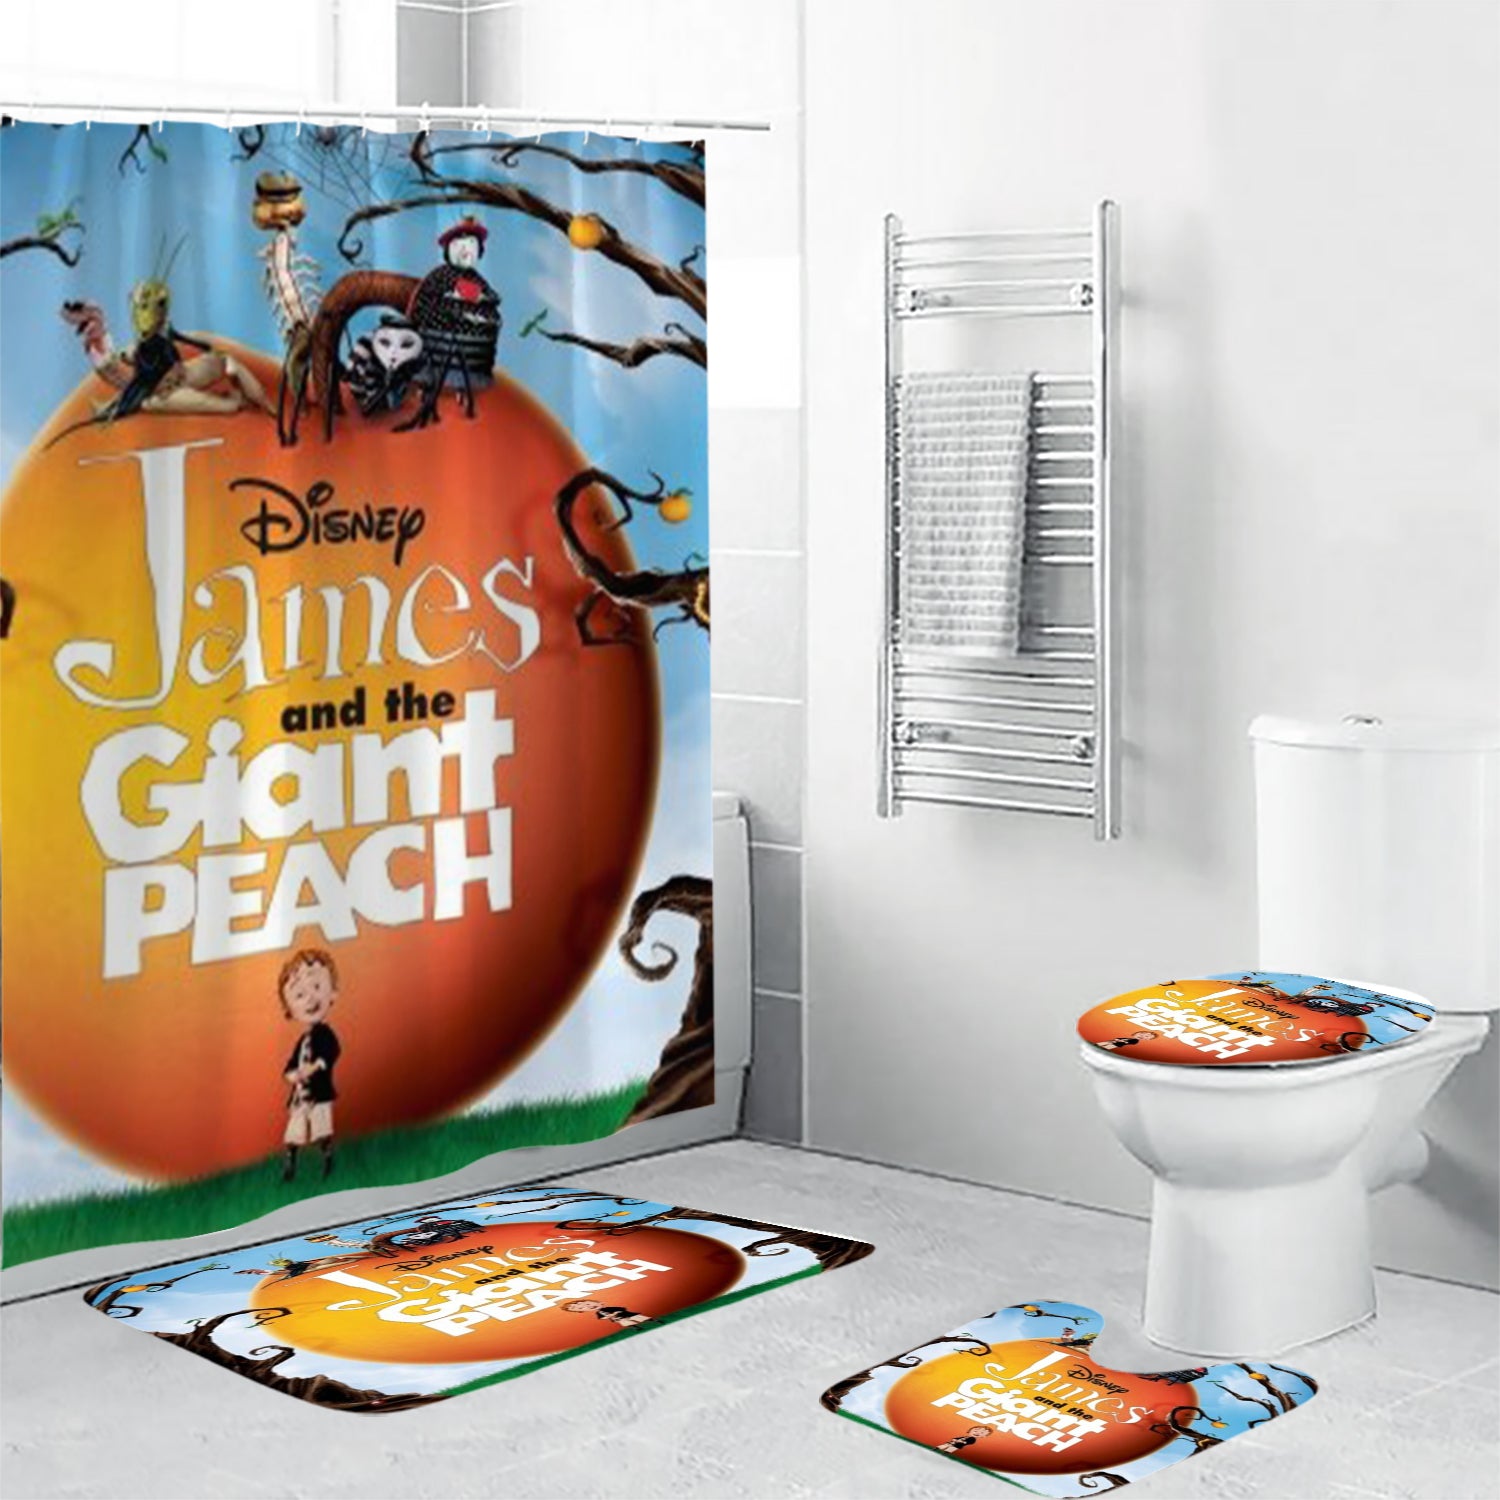 James and the Giant Peach Poster 4 4PCS Shower Curtain Non-Slip Toilet Lid Cover Bath Mat - Bathroom Set Fans Gifts